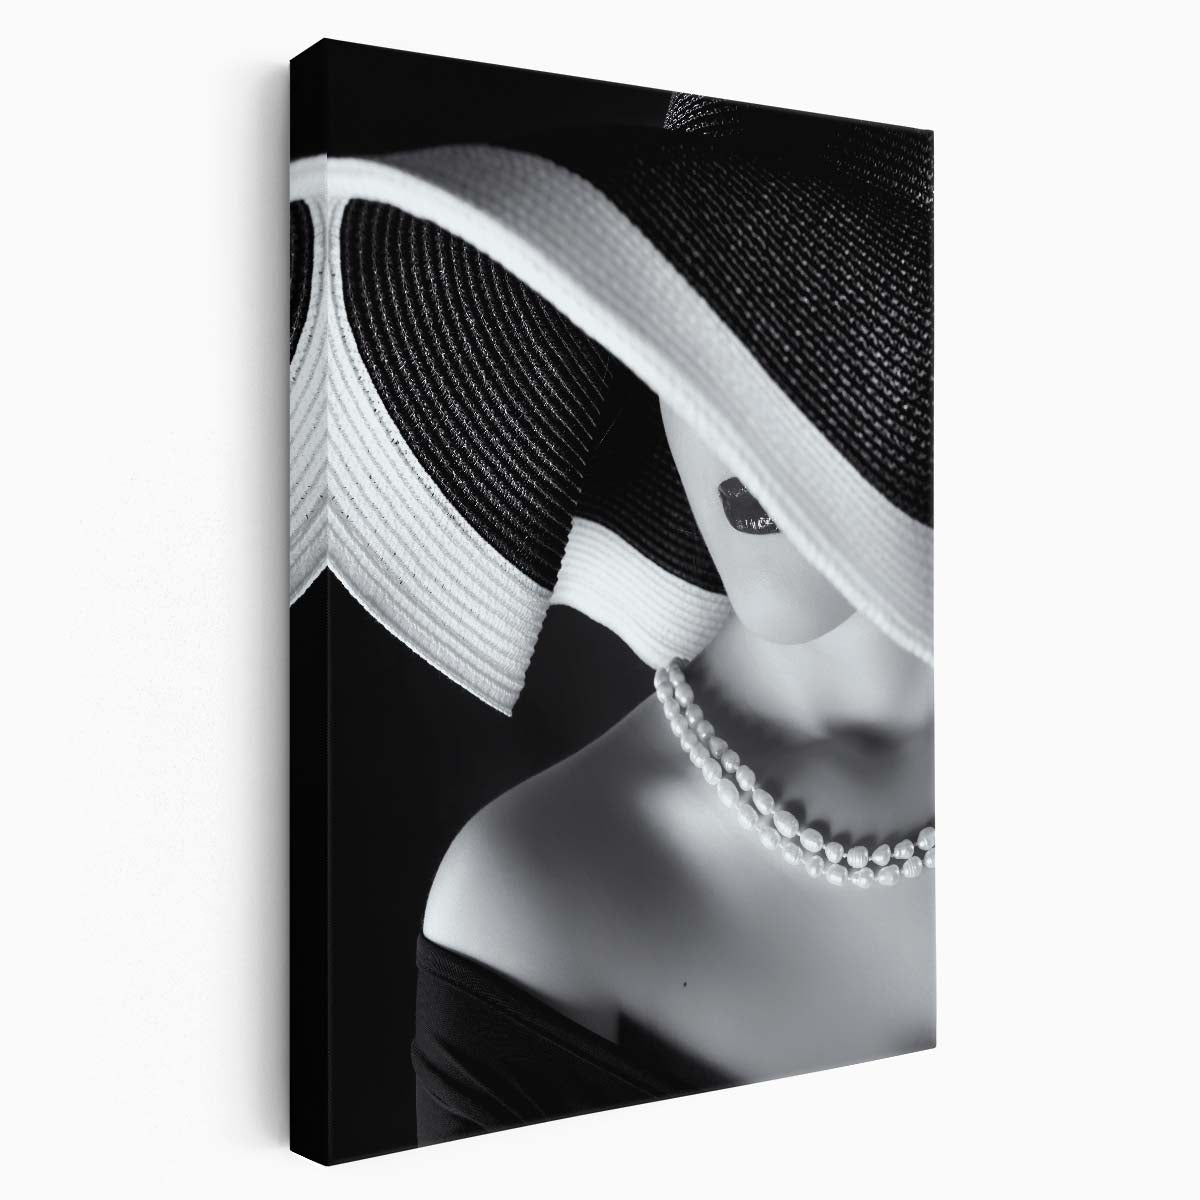 Sensual Monochrome Fashion Portrait of Woman with Pearls & Hat Photography by Luxuriance Designs, made in USA